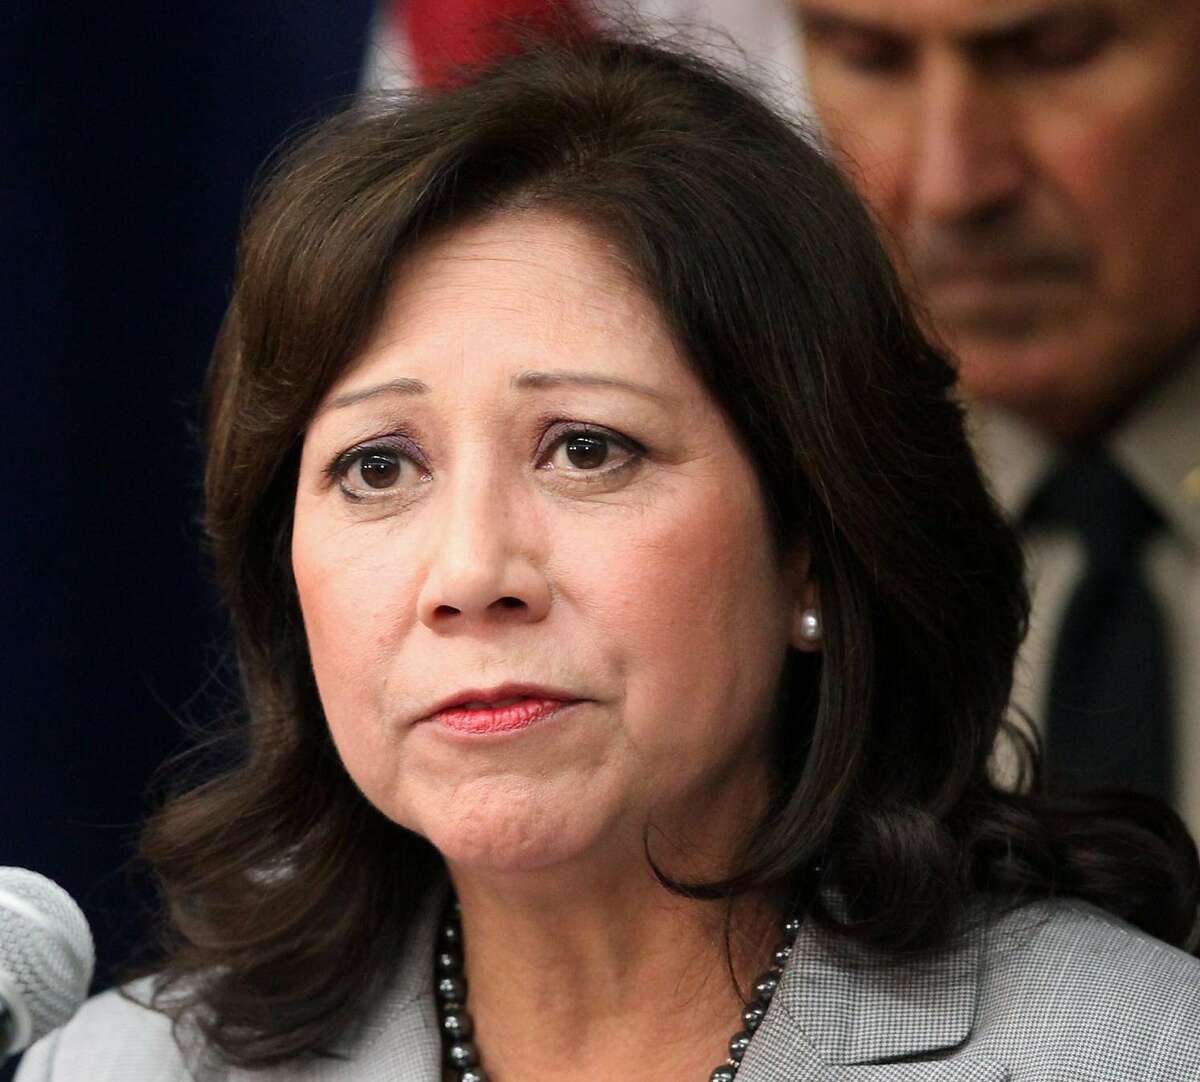 FILE - This Nov. 16, 2012 file photo shows Labor Secretary Hilda Solis speaking in Los Angeles. Solis has told colleagues she is resigning from Obama administration. (AP Photo/Richard Vogel, File)